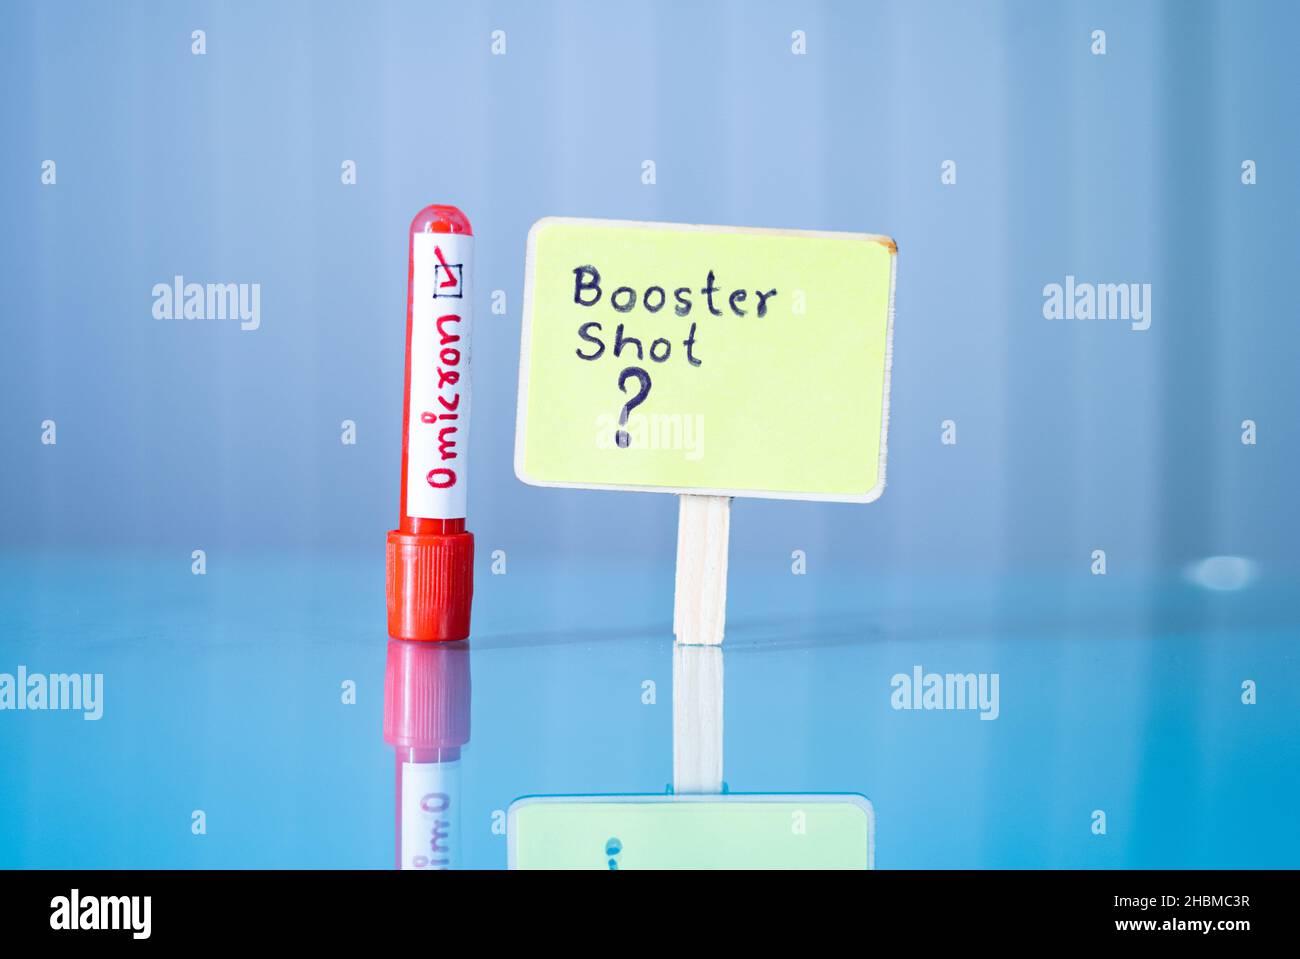 Booster shot question mark sign board placed next to positive Omicron Blood sample, concept showing will booster shot work or needed for new Omicron Stock Photo